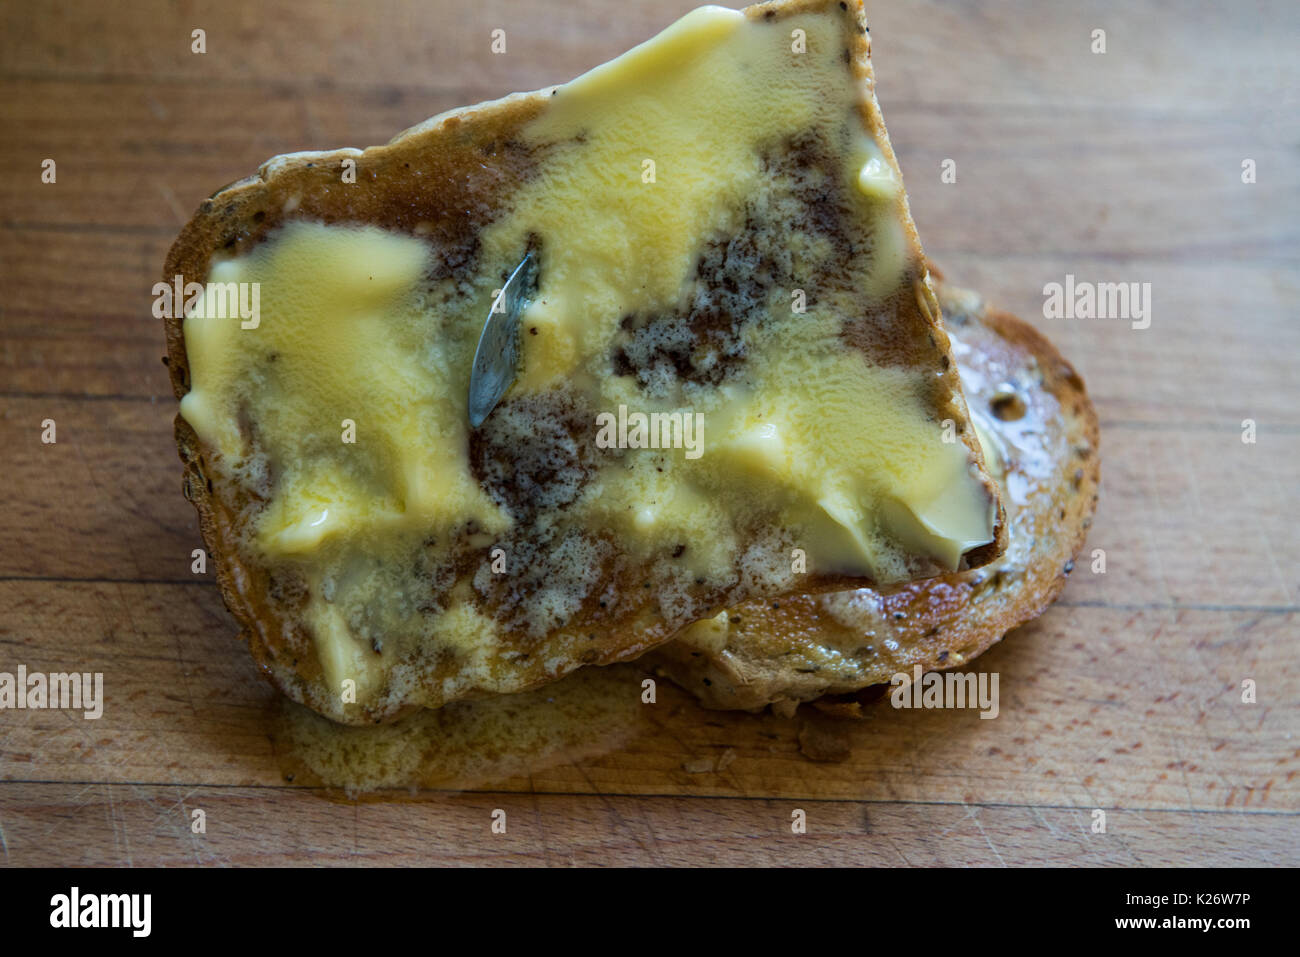 Hot Buttered Toast with Knife Plunged through it. Stock Photo